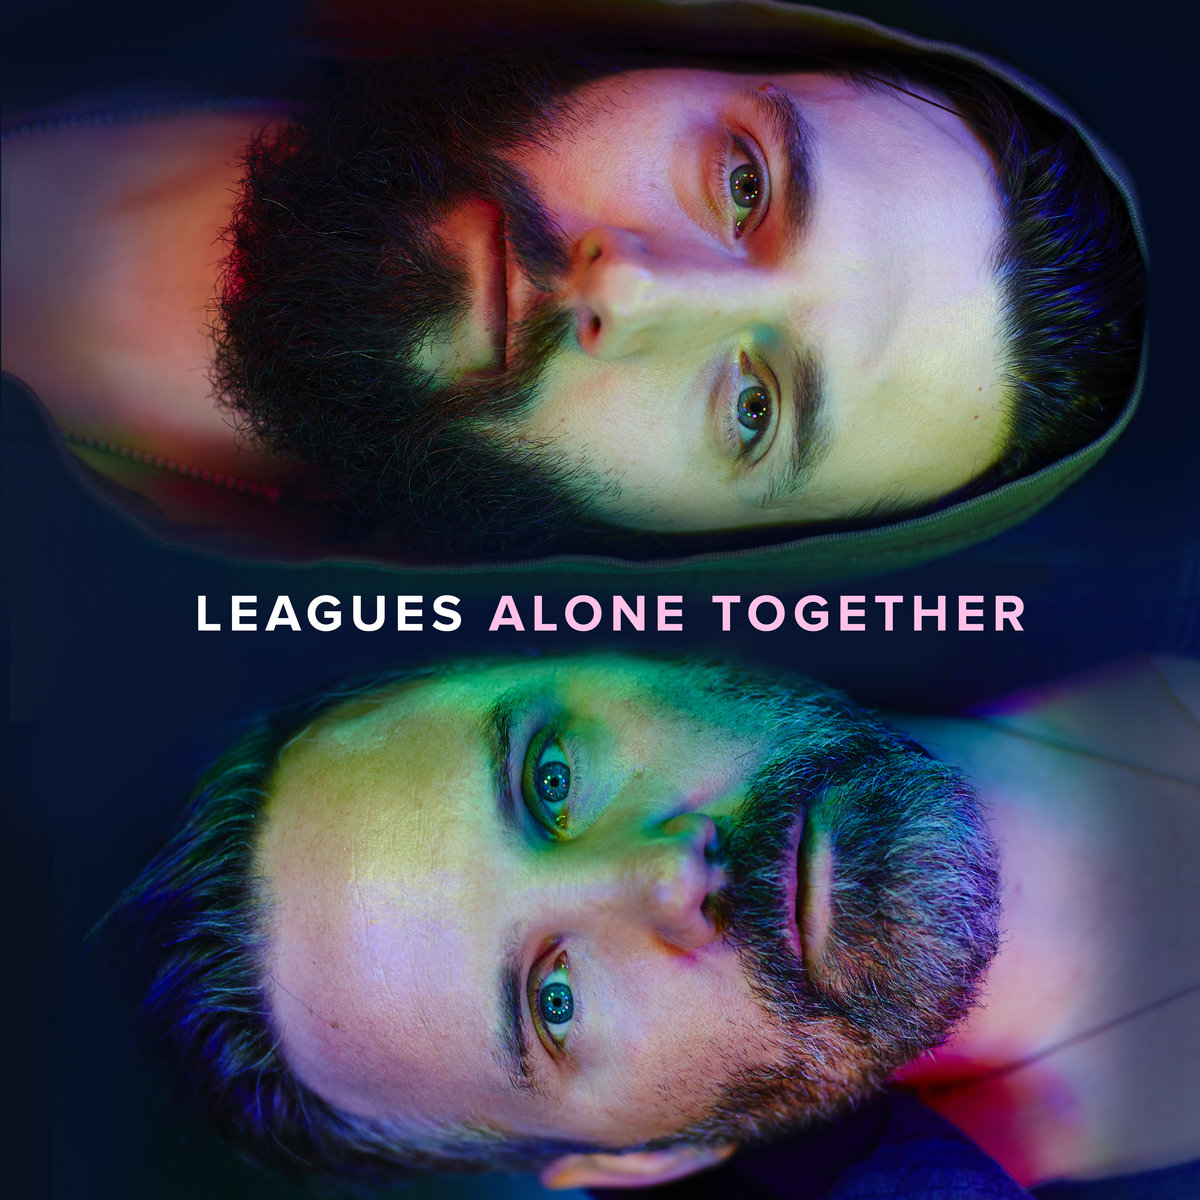 Alone Together Leagues